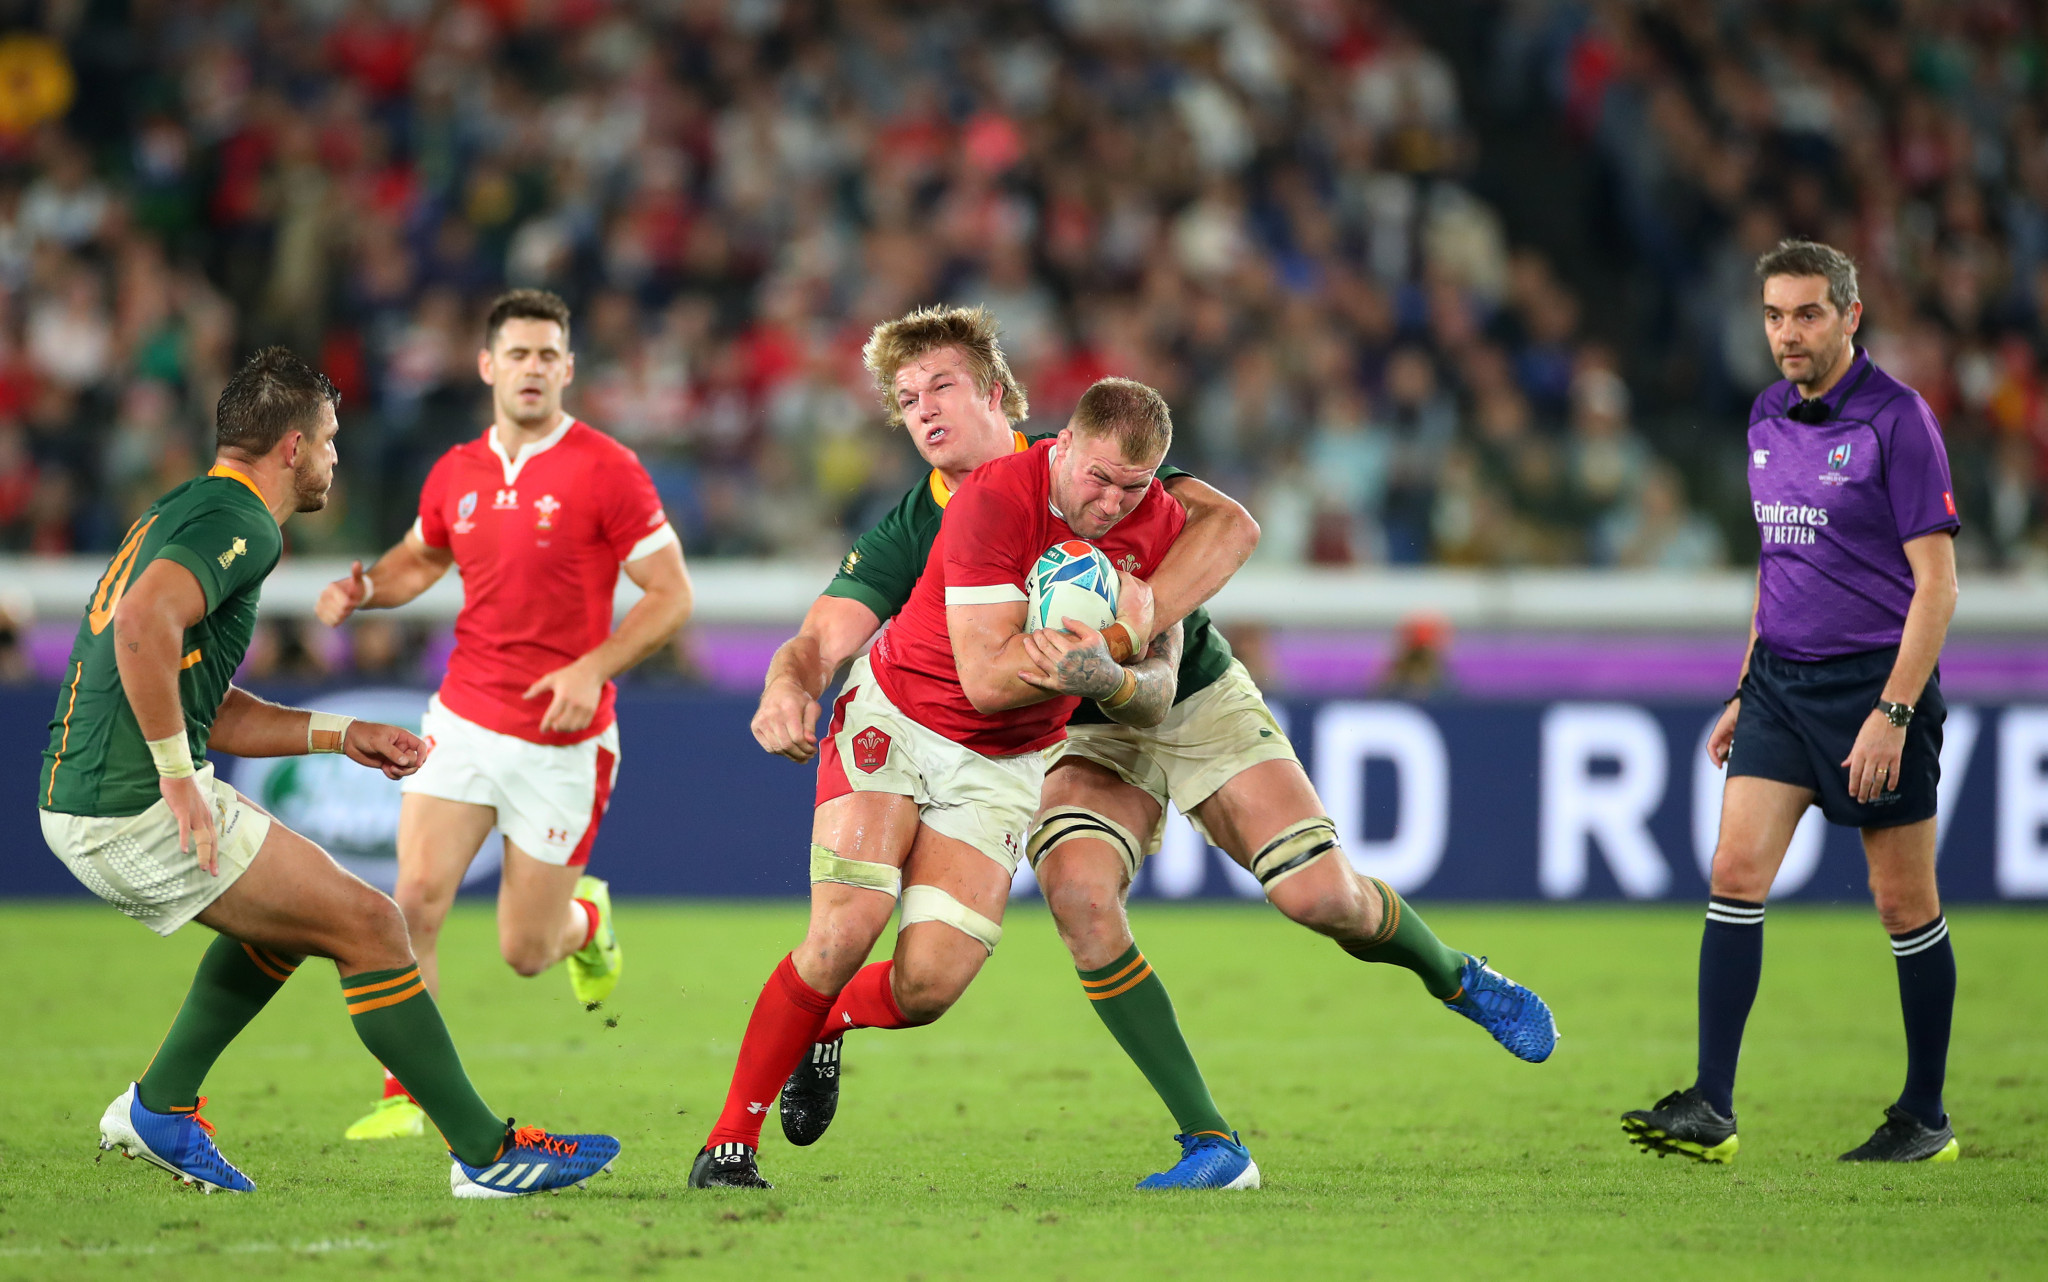 Wales went in search of a late winner but it proved elusive ©Getty Images